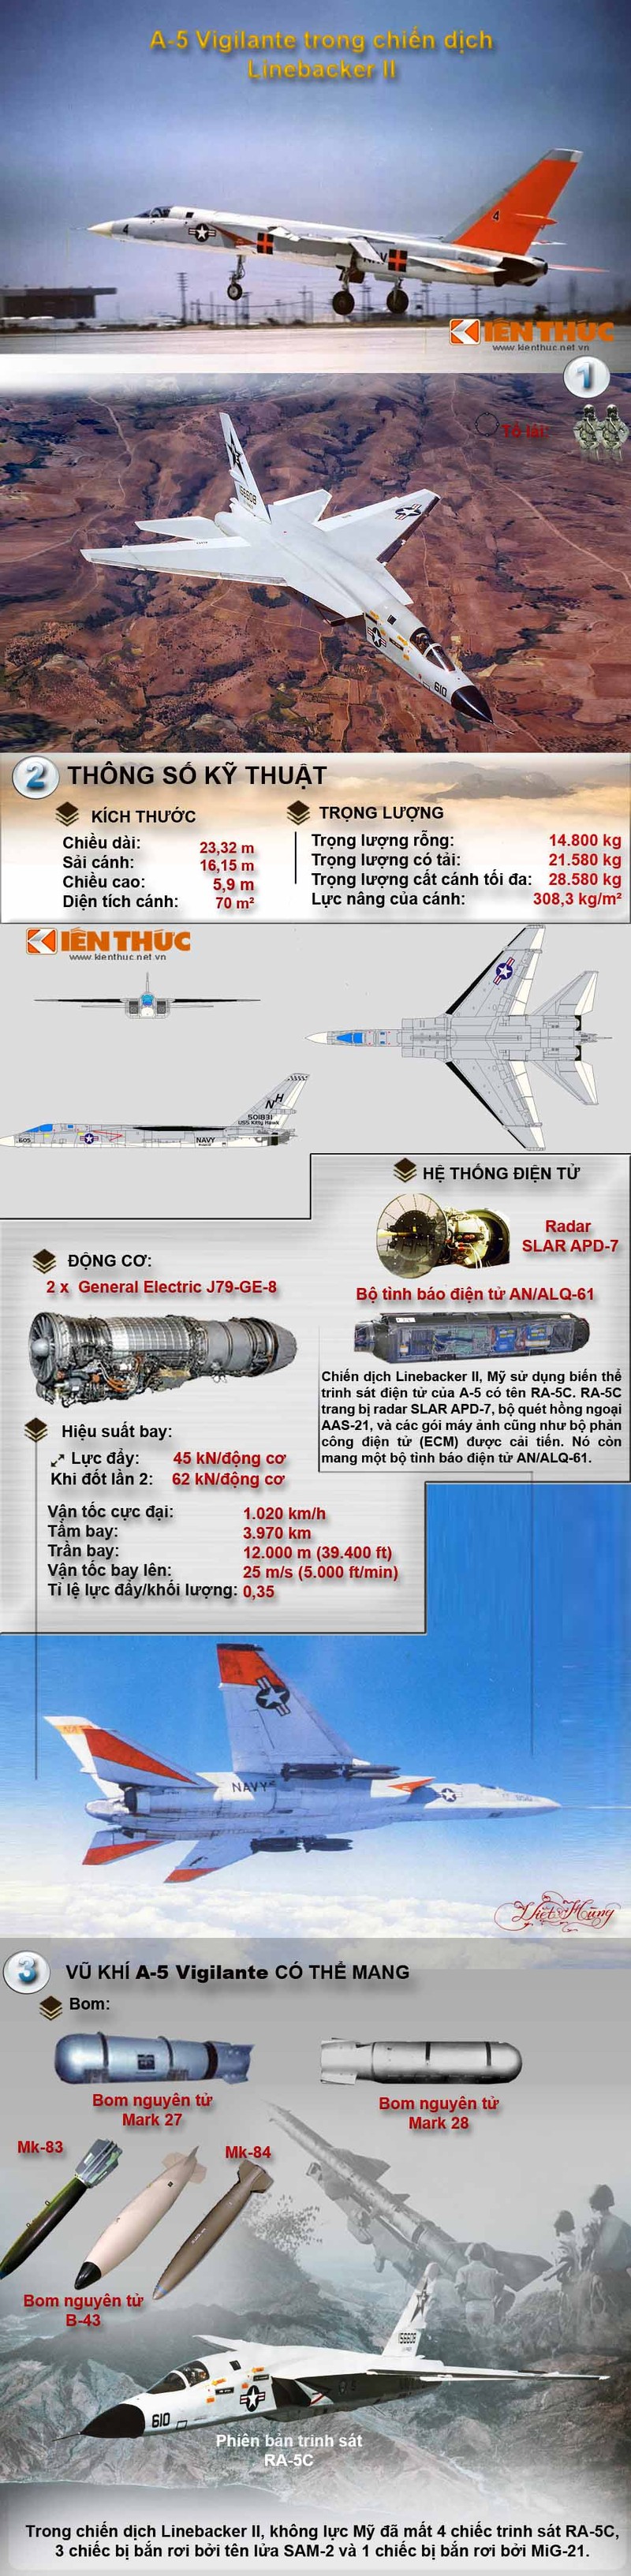 Infographic: May bay My trong chien dich Linebacker II nam 1972 (1)